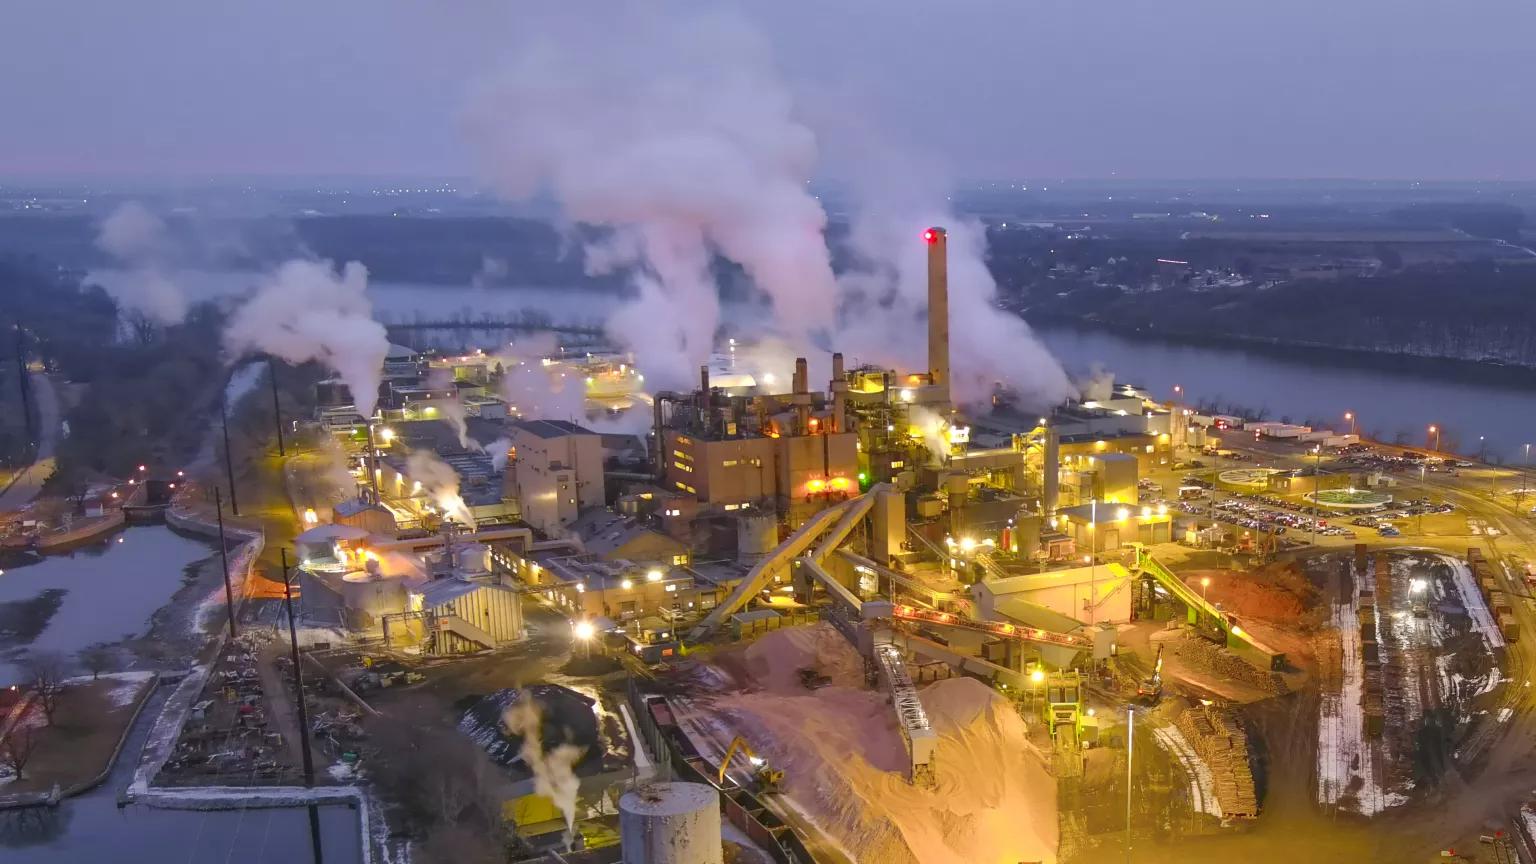 An aerial view of an industrial paper mill spewing out smoke from its buildings into the evening sky in Green Bay, Wisconsin